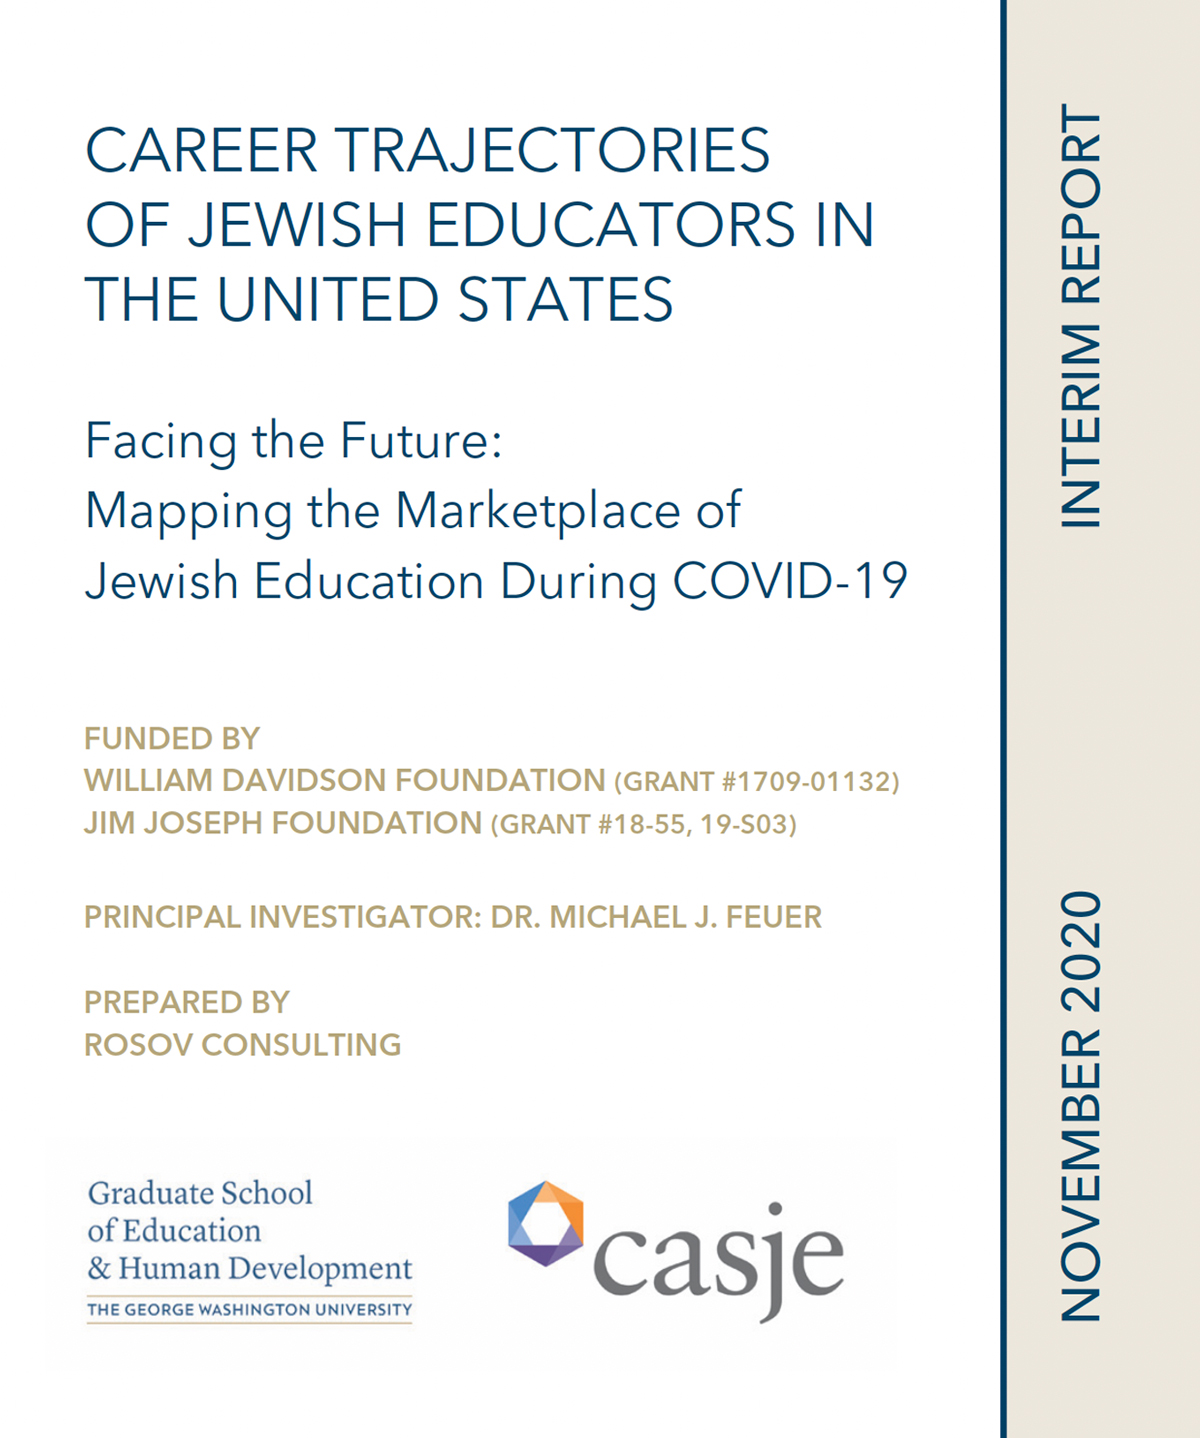 screenshot of report cover: CAREER TRAJECTORIES OF JEWISH EDUCATORS IN THE UNITED STATES Facing the Future: Mapping the Marketplace of Jewish Education During COVID-19